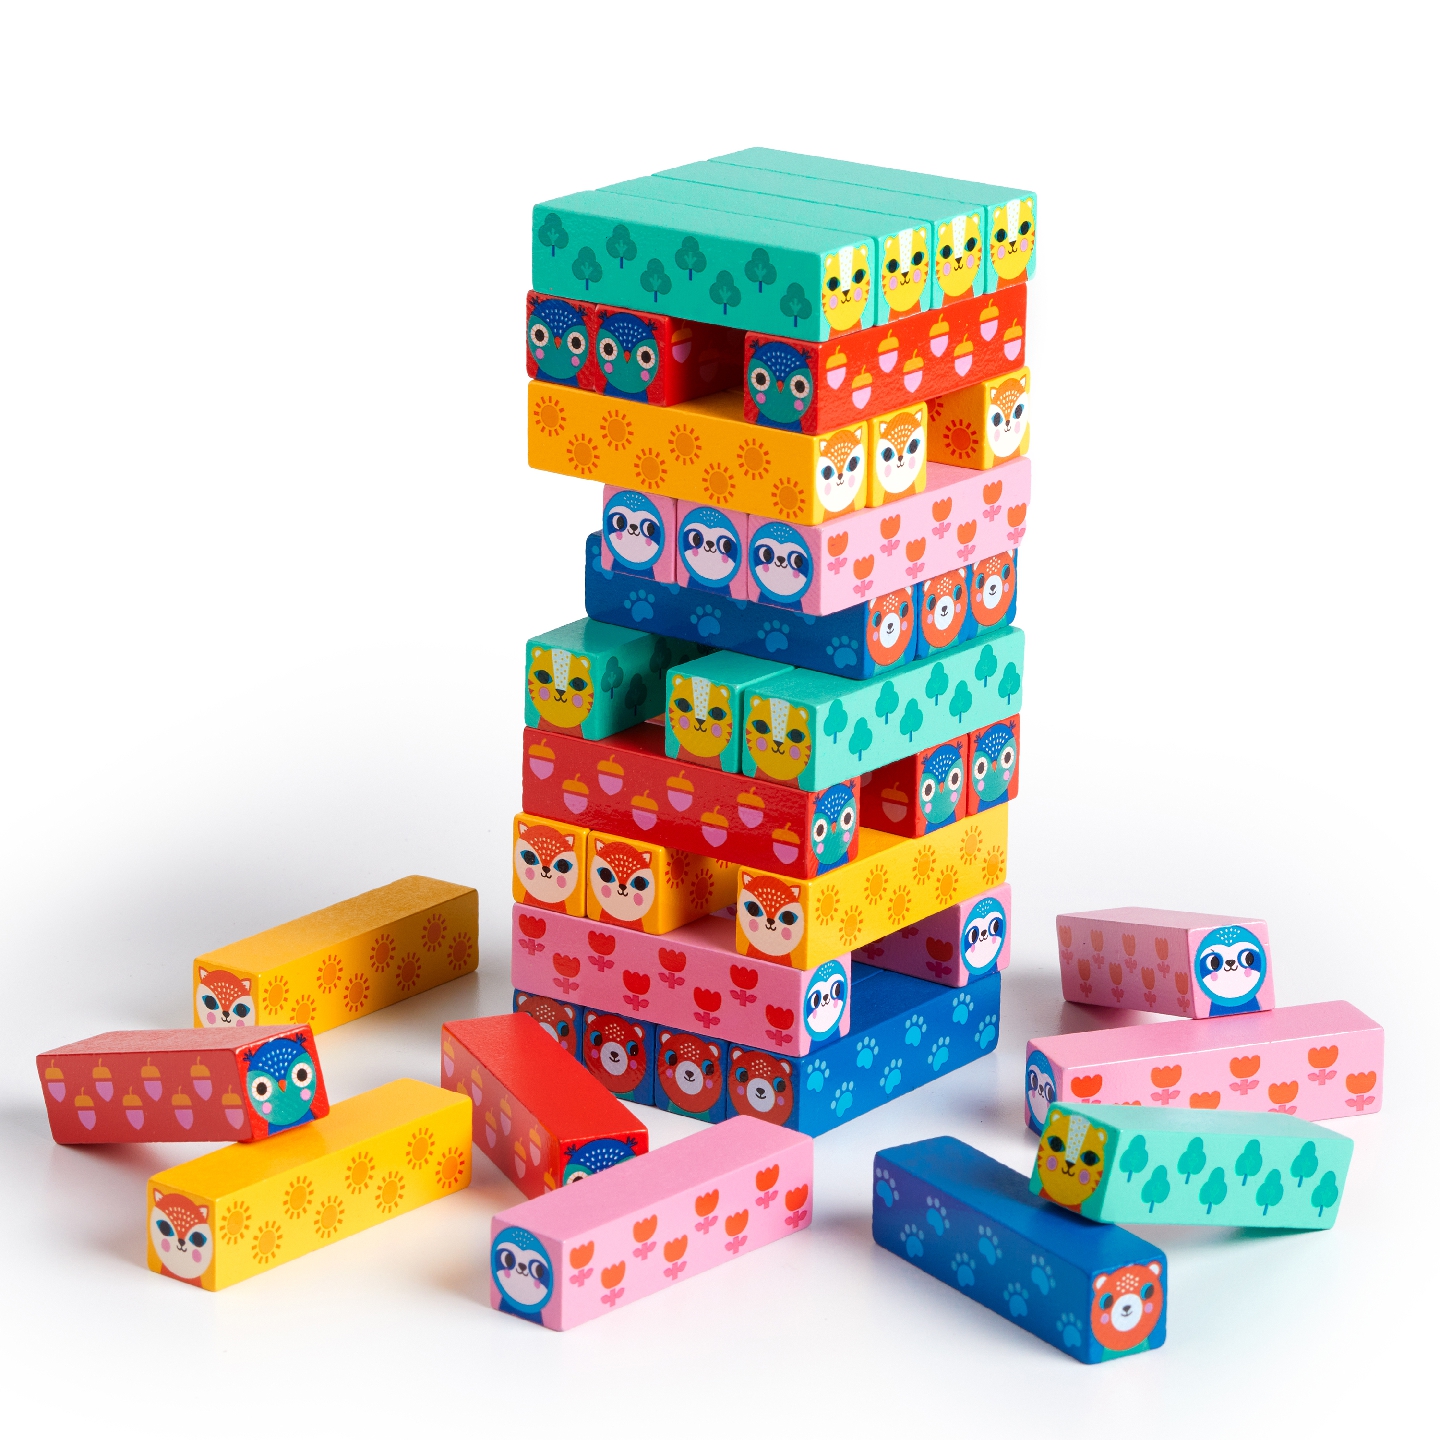 Wild Wobble! Wooden Tumbling Tower